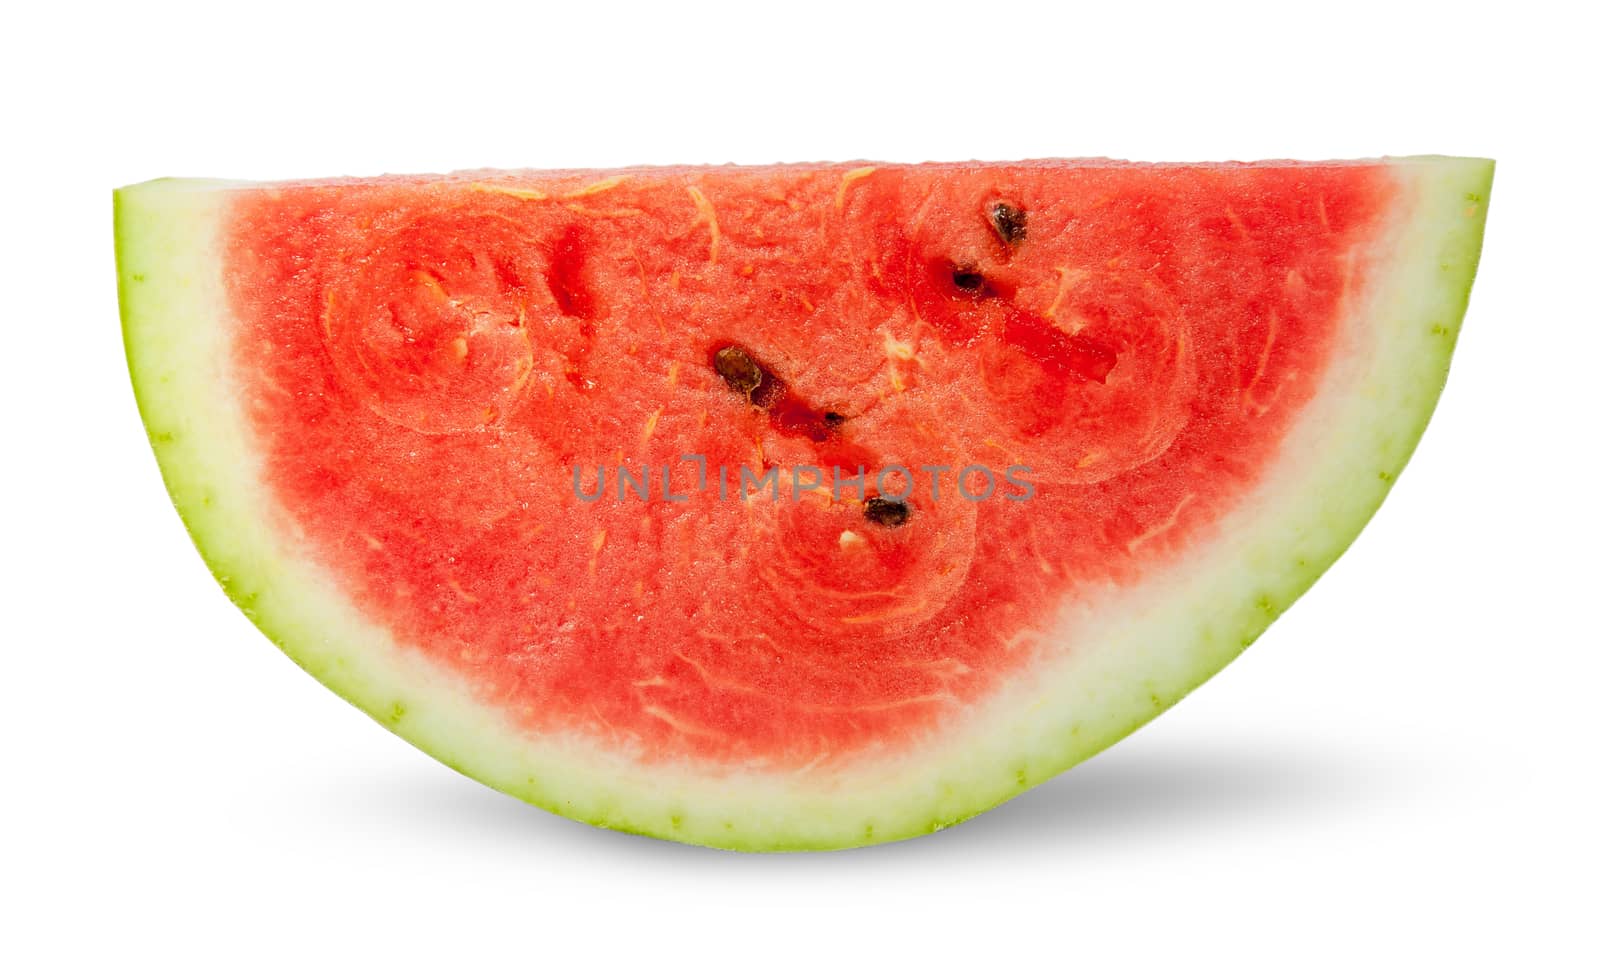 One red slice of ripe watermelon isolated on white background